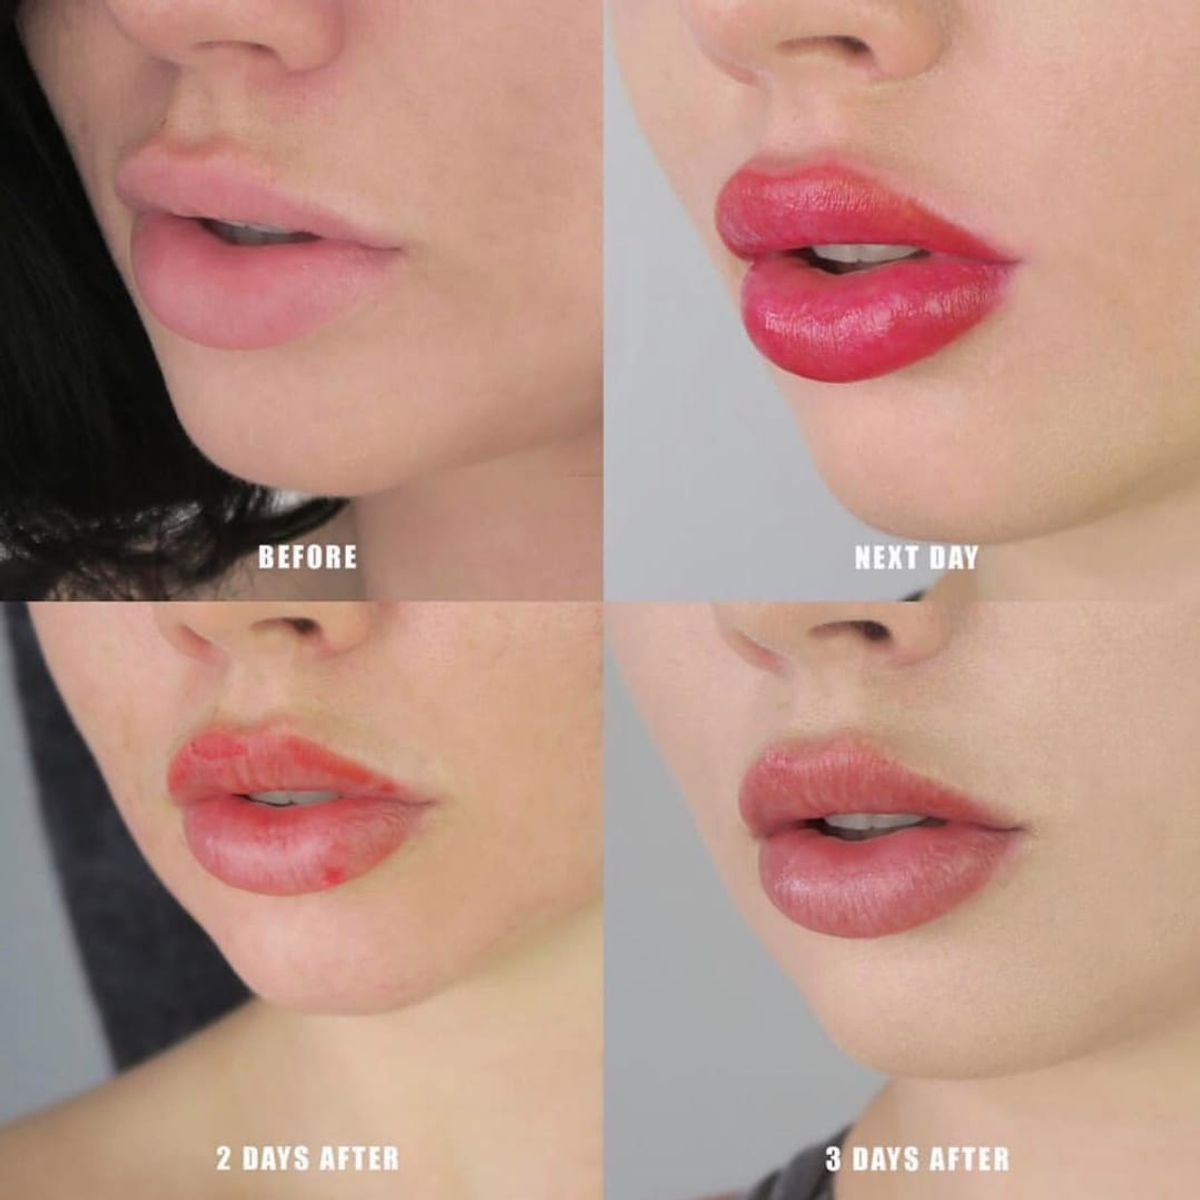 How Long Does Lip Blush Take To Heal? 